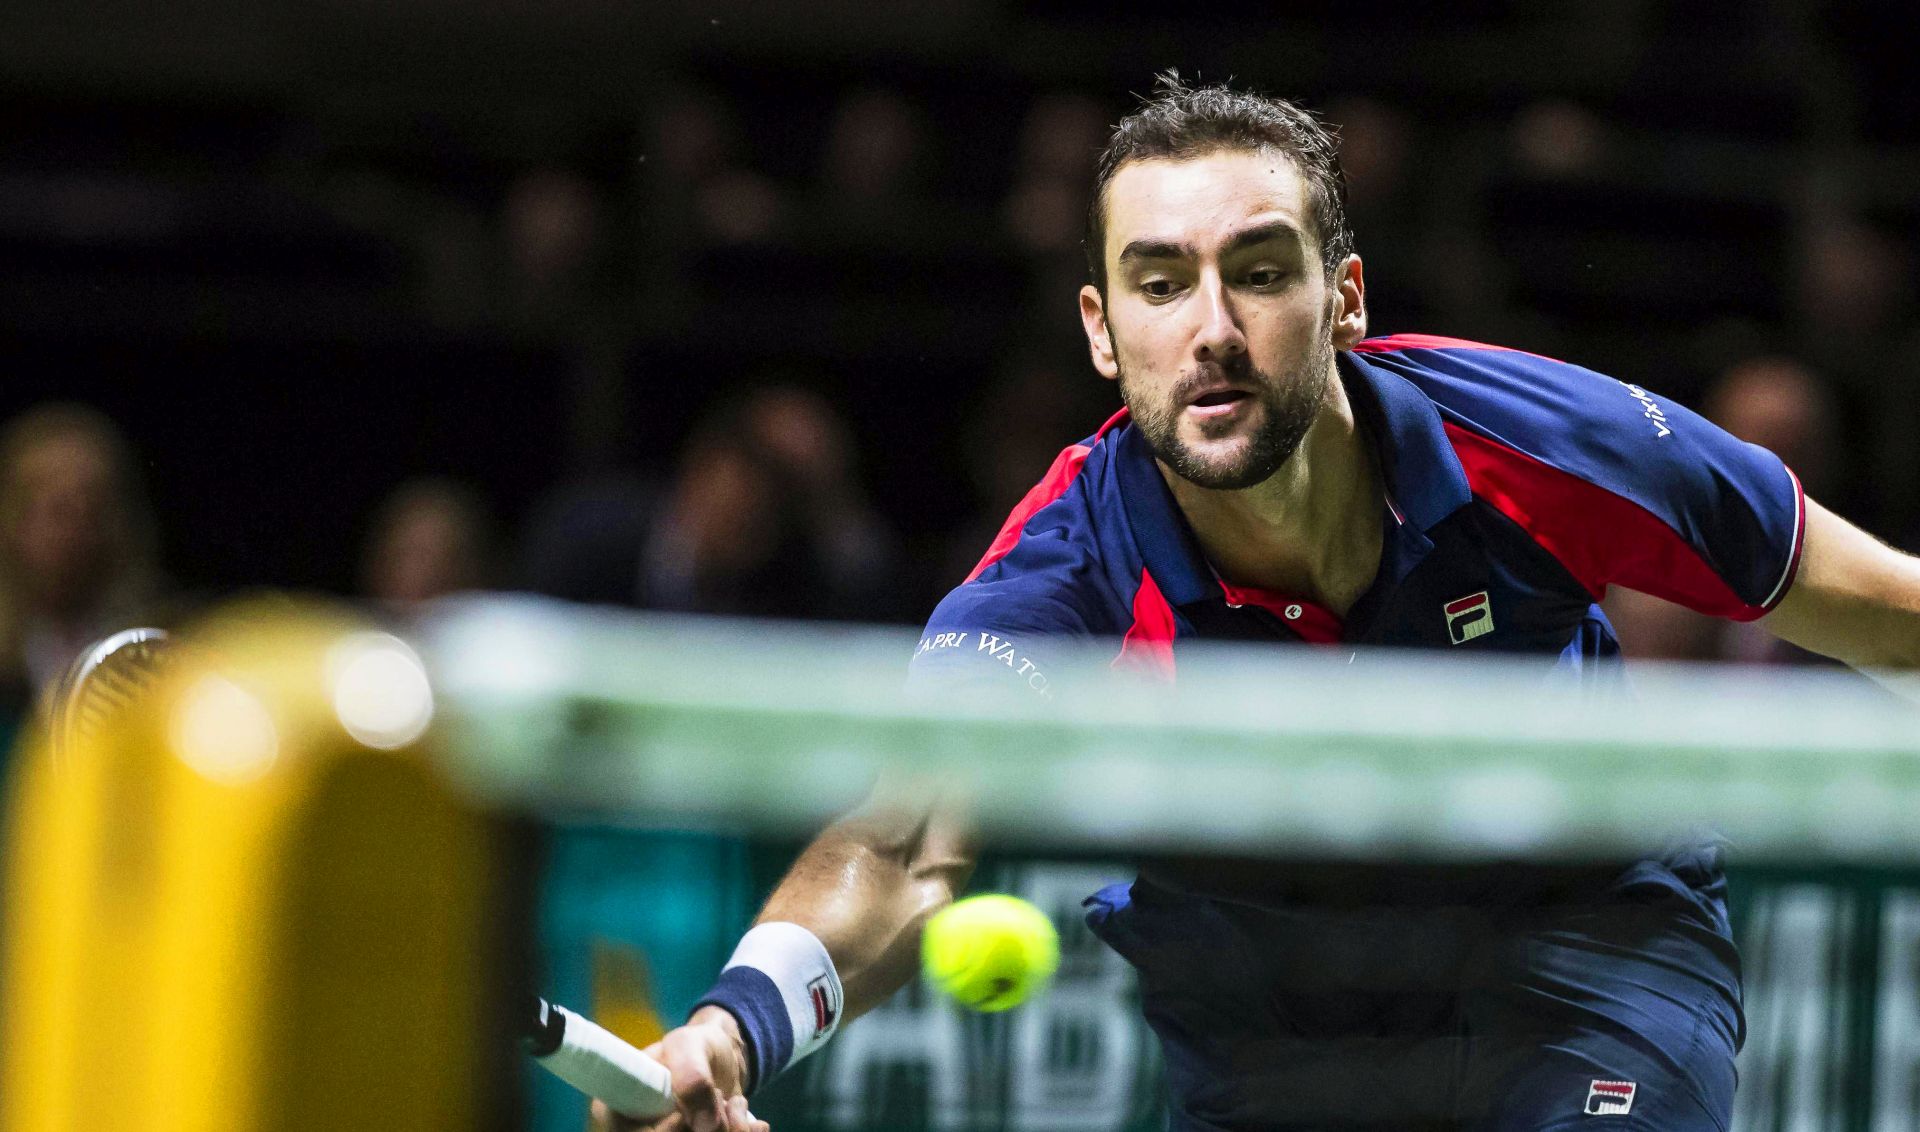 epa05800228 Marin Cilic of Croatia in action against Jo-Wilfried Tsonga of France during their quarter final match of the ABN Amro World Tennis Tournament in Rotterdam, Netherlands, 17 February 2017.  EPA/KOEN SUYK